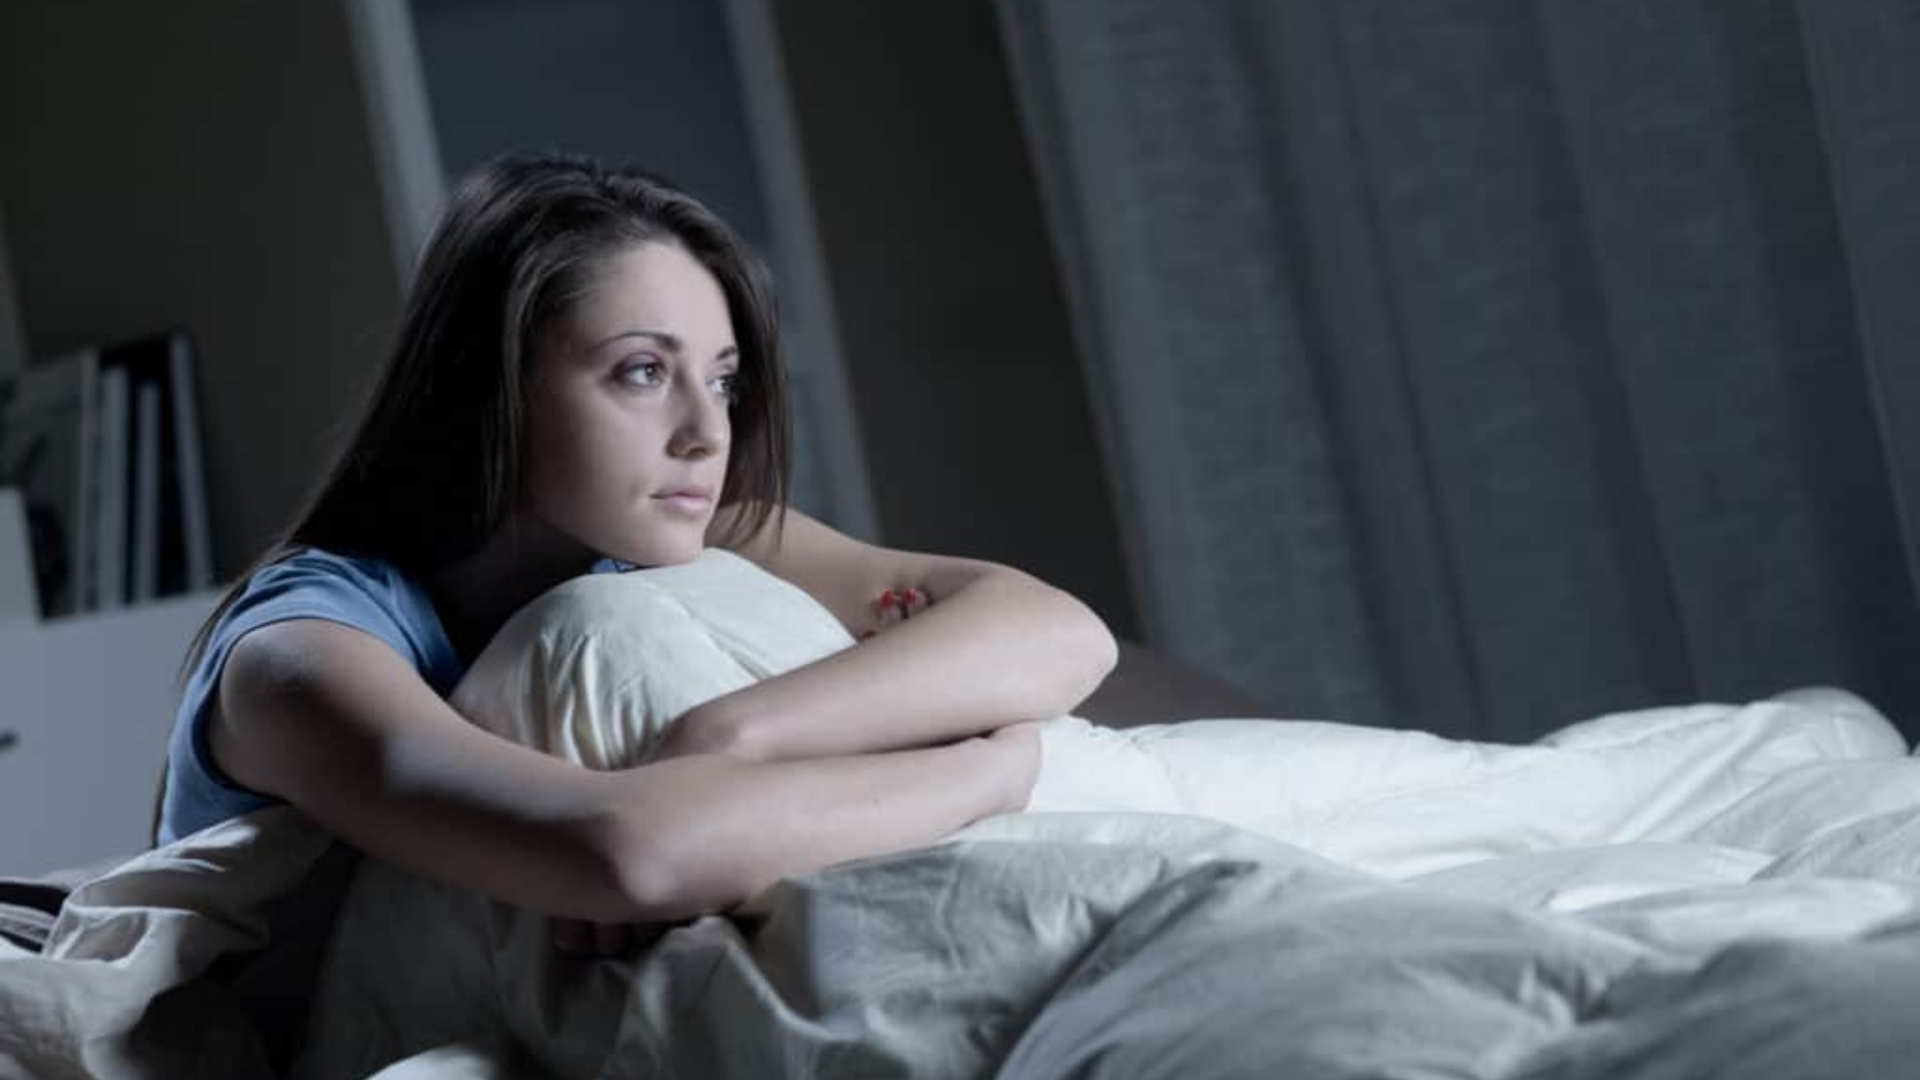 What Are The Different Types And Treatments For Sleep Disorders? Let’s Find Out